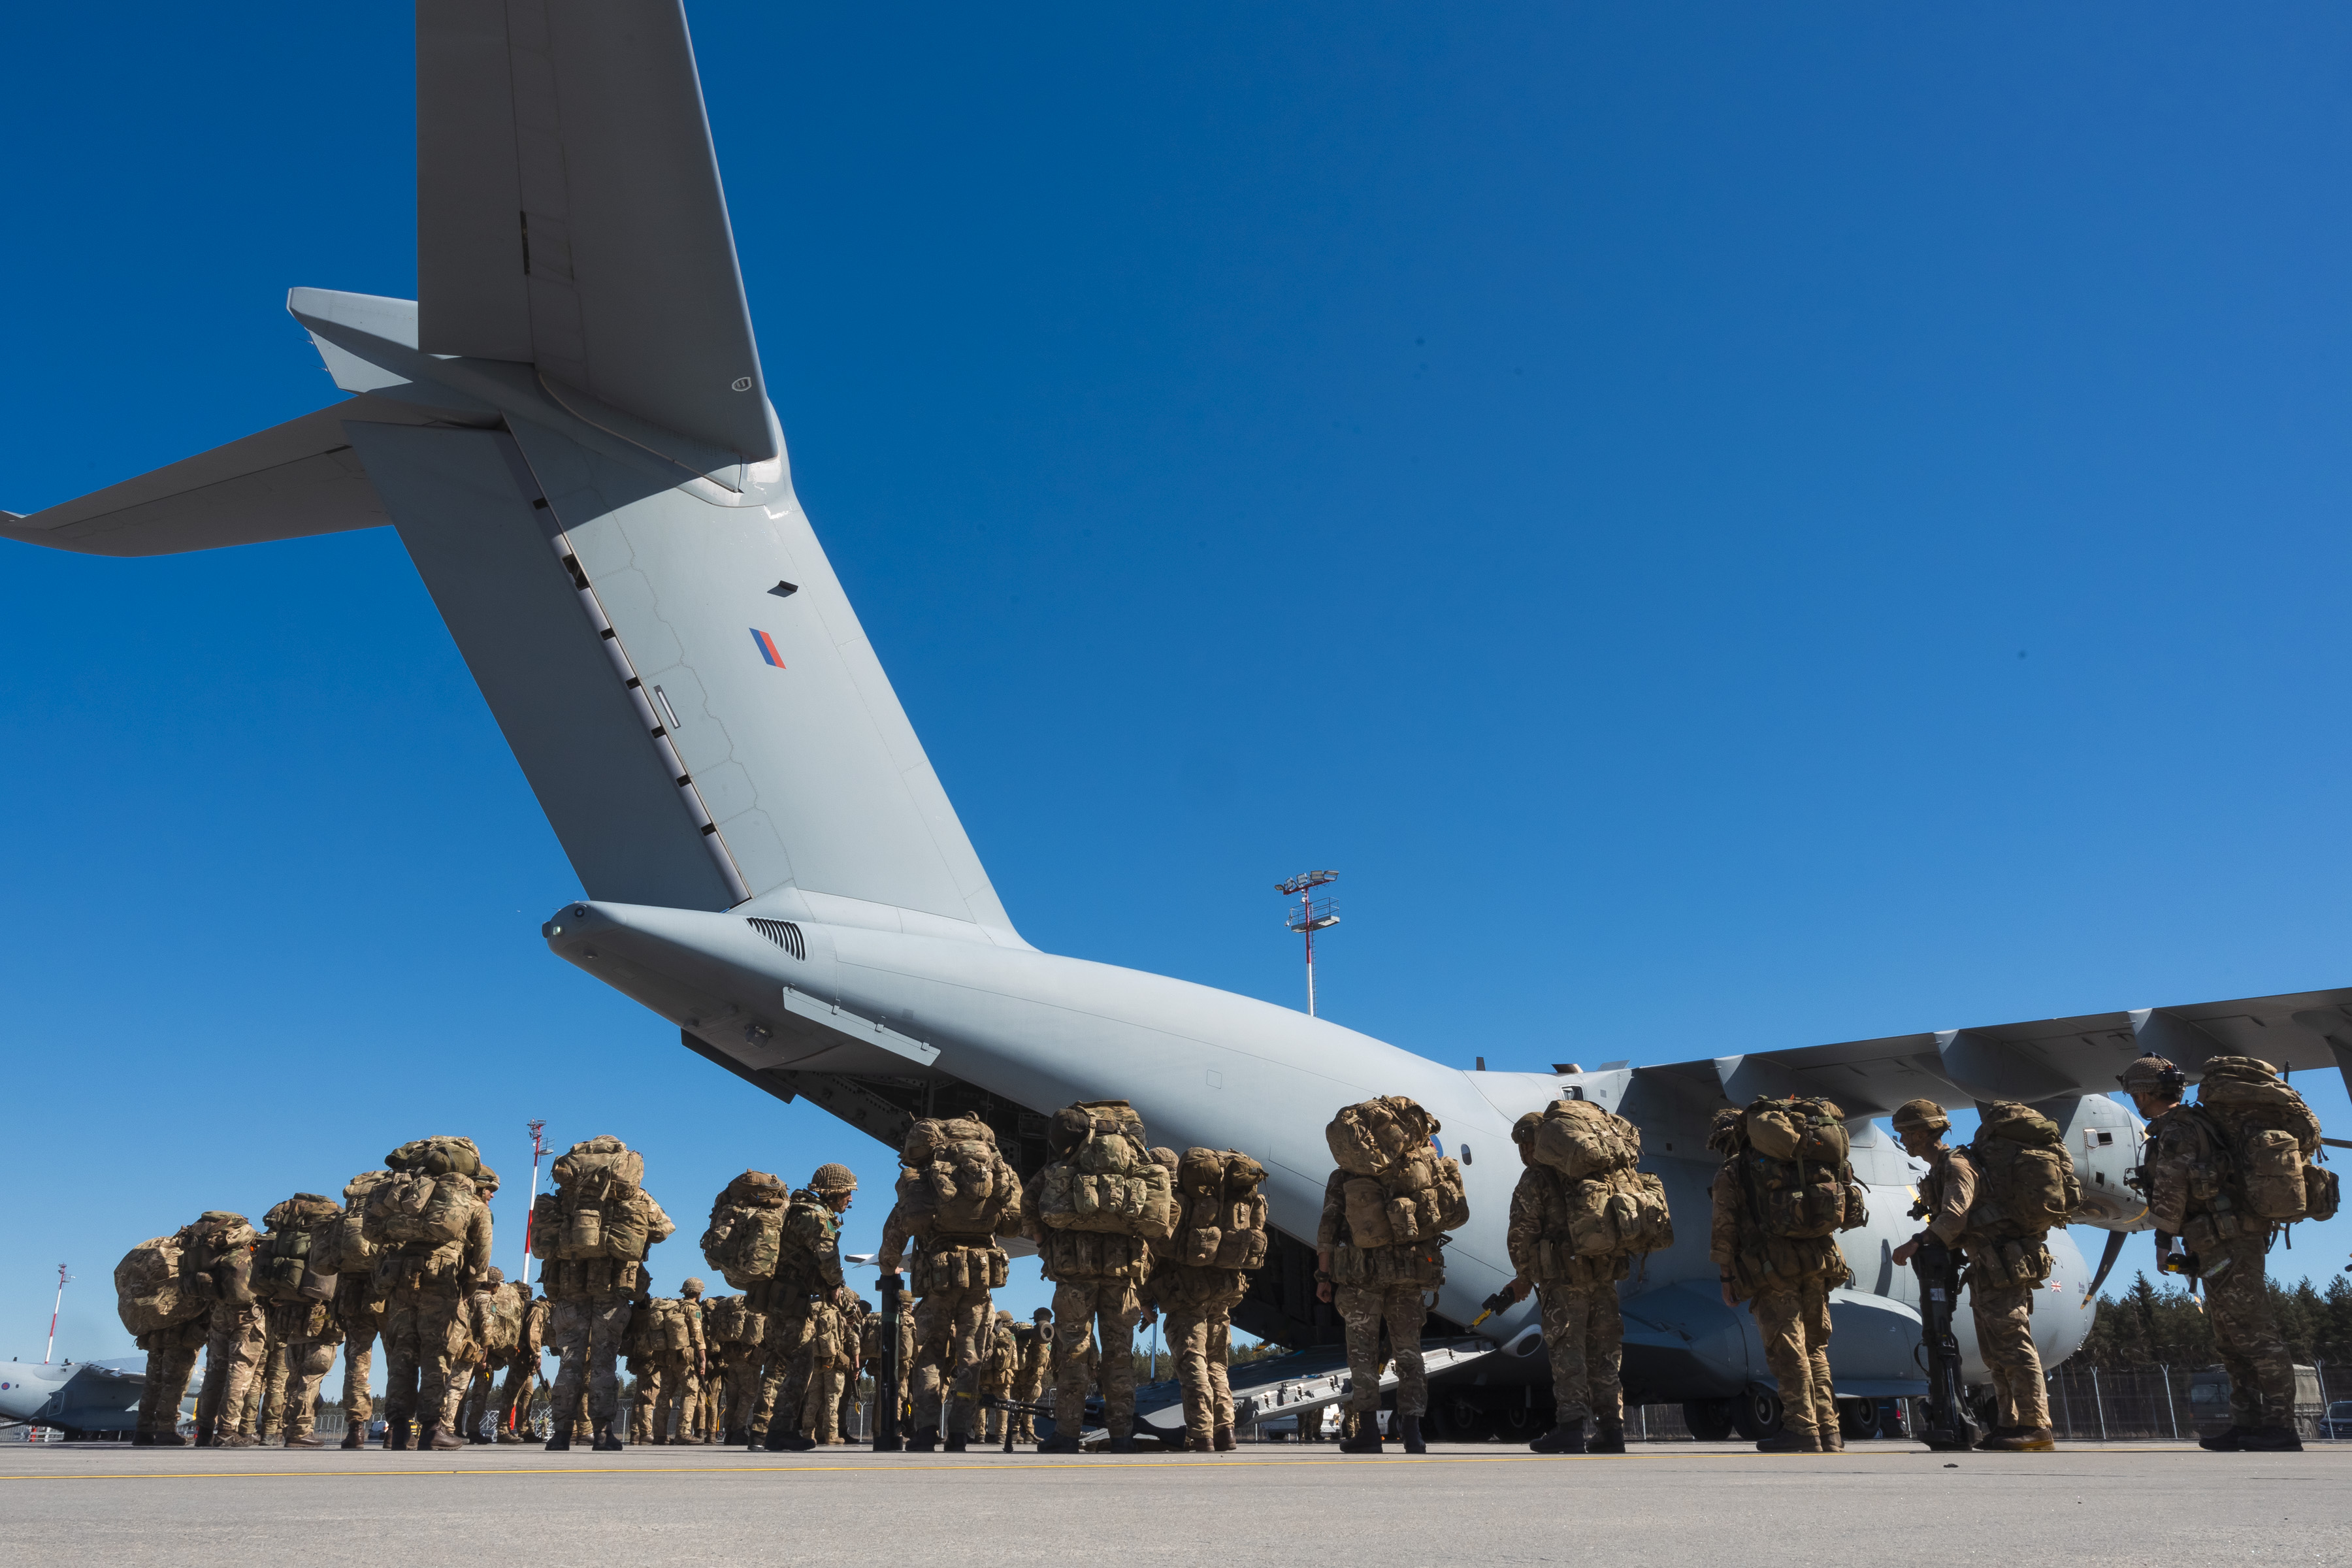 RAF Aircraft with paratroopers